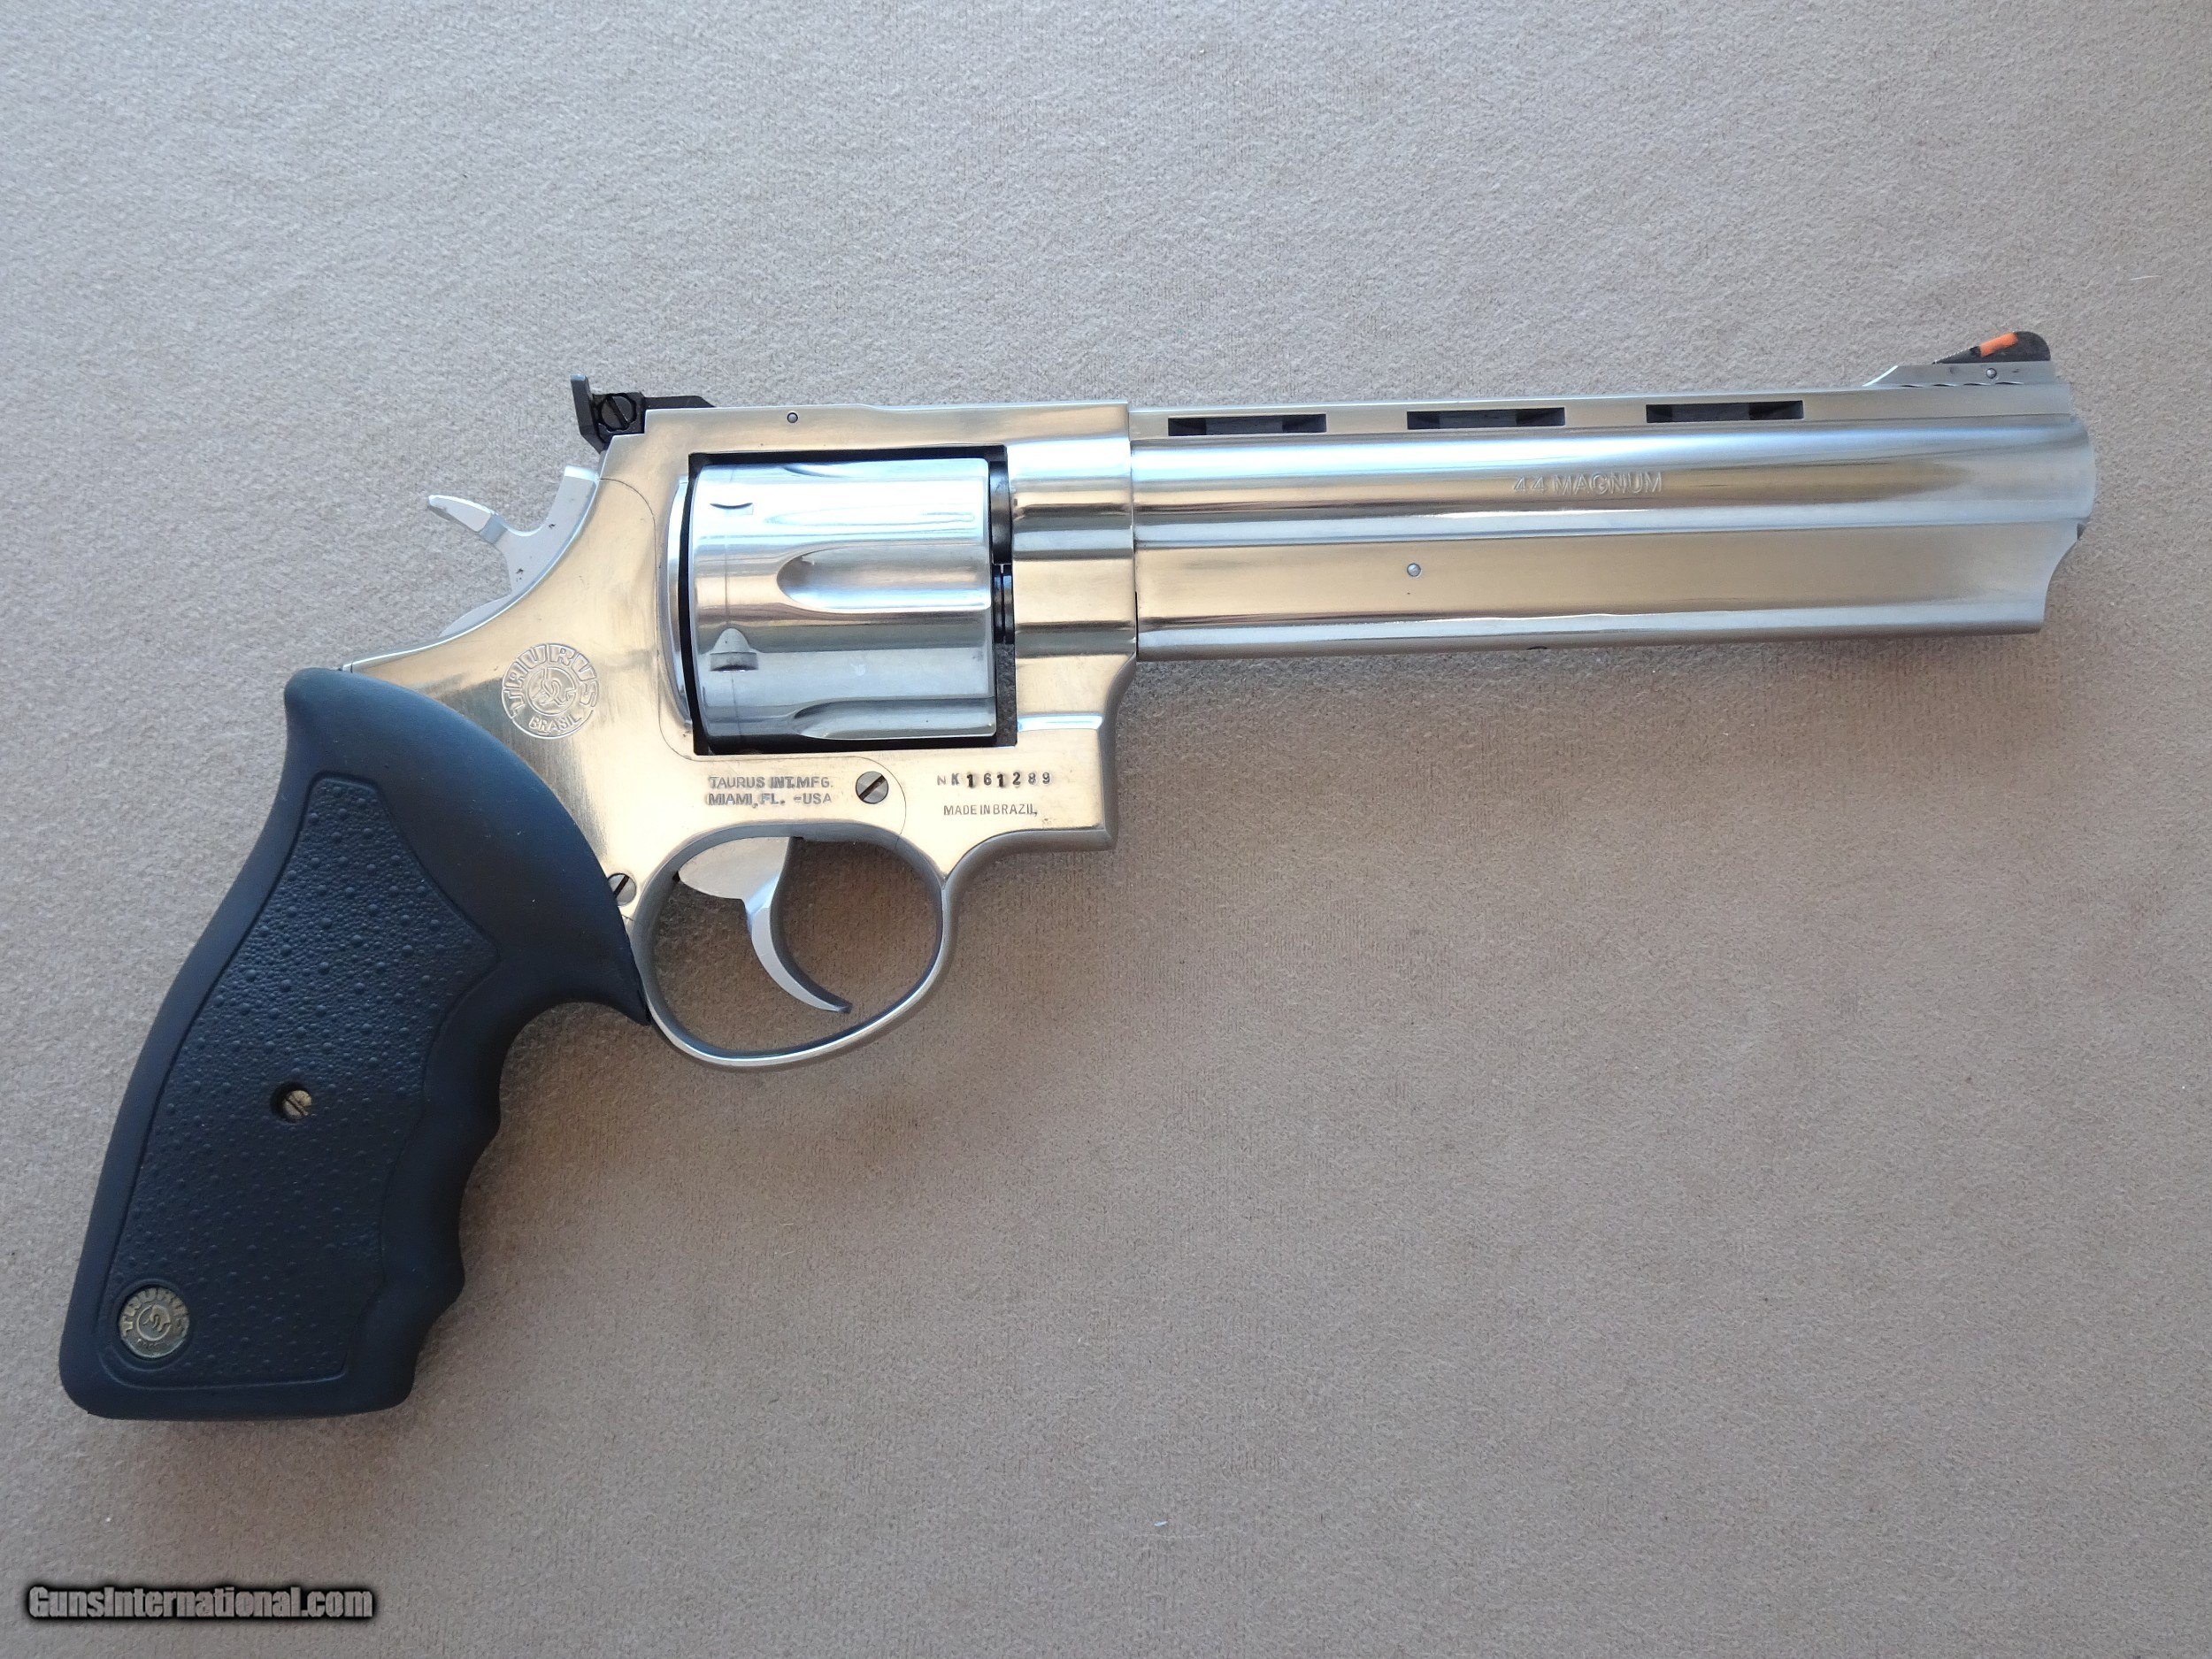 Taurus Revolvers Small, Med Large Frame, Judge Tracker, 45% OFF